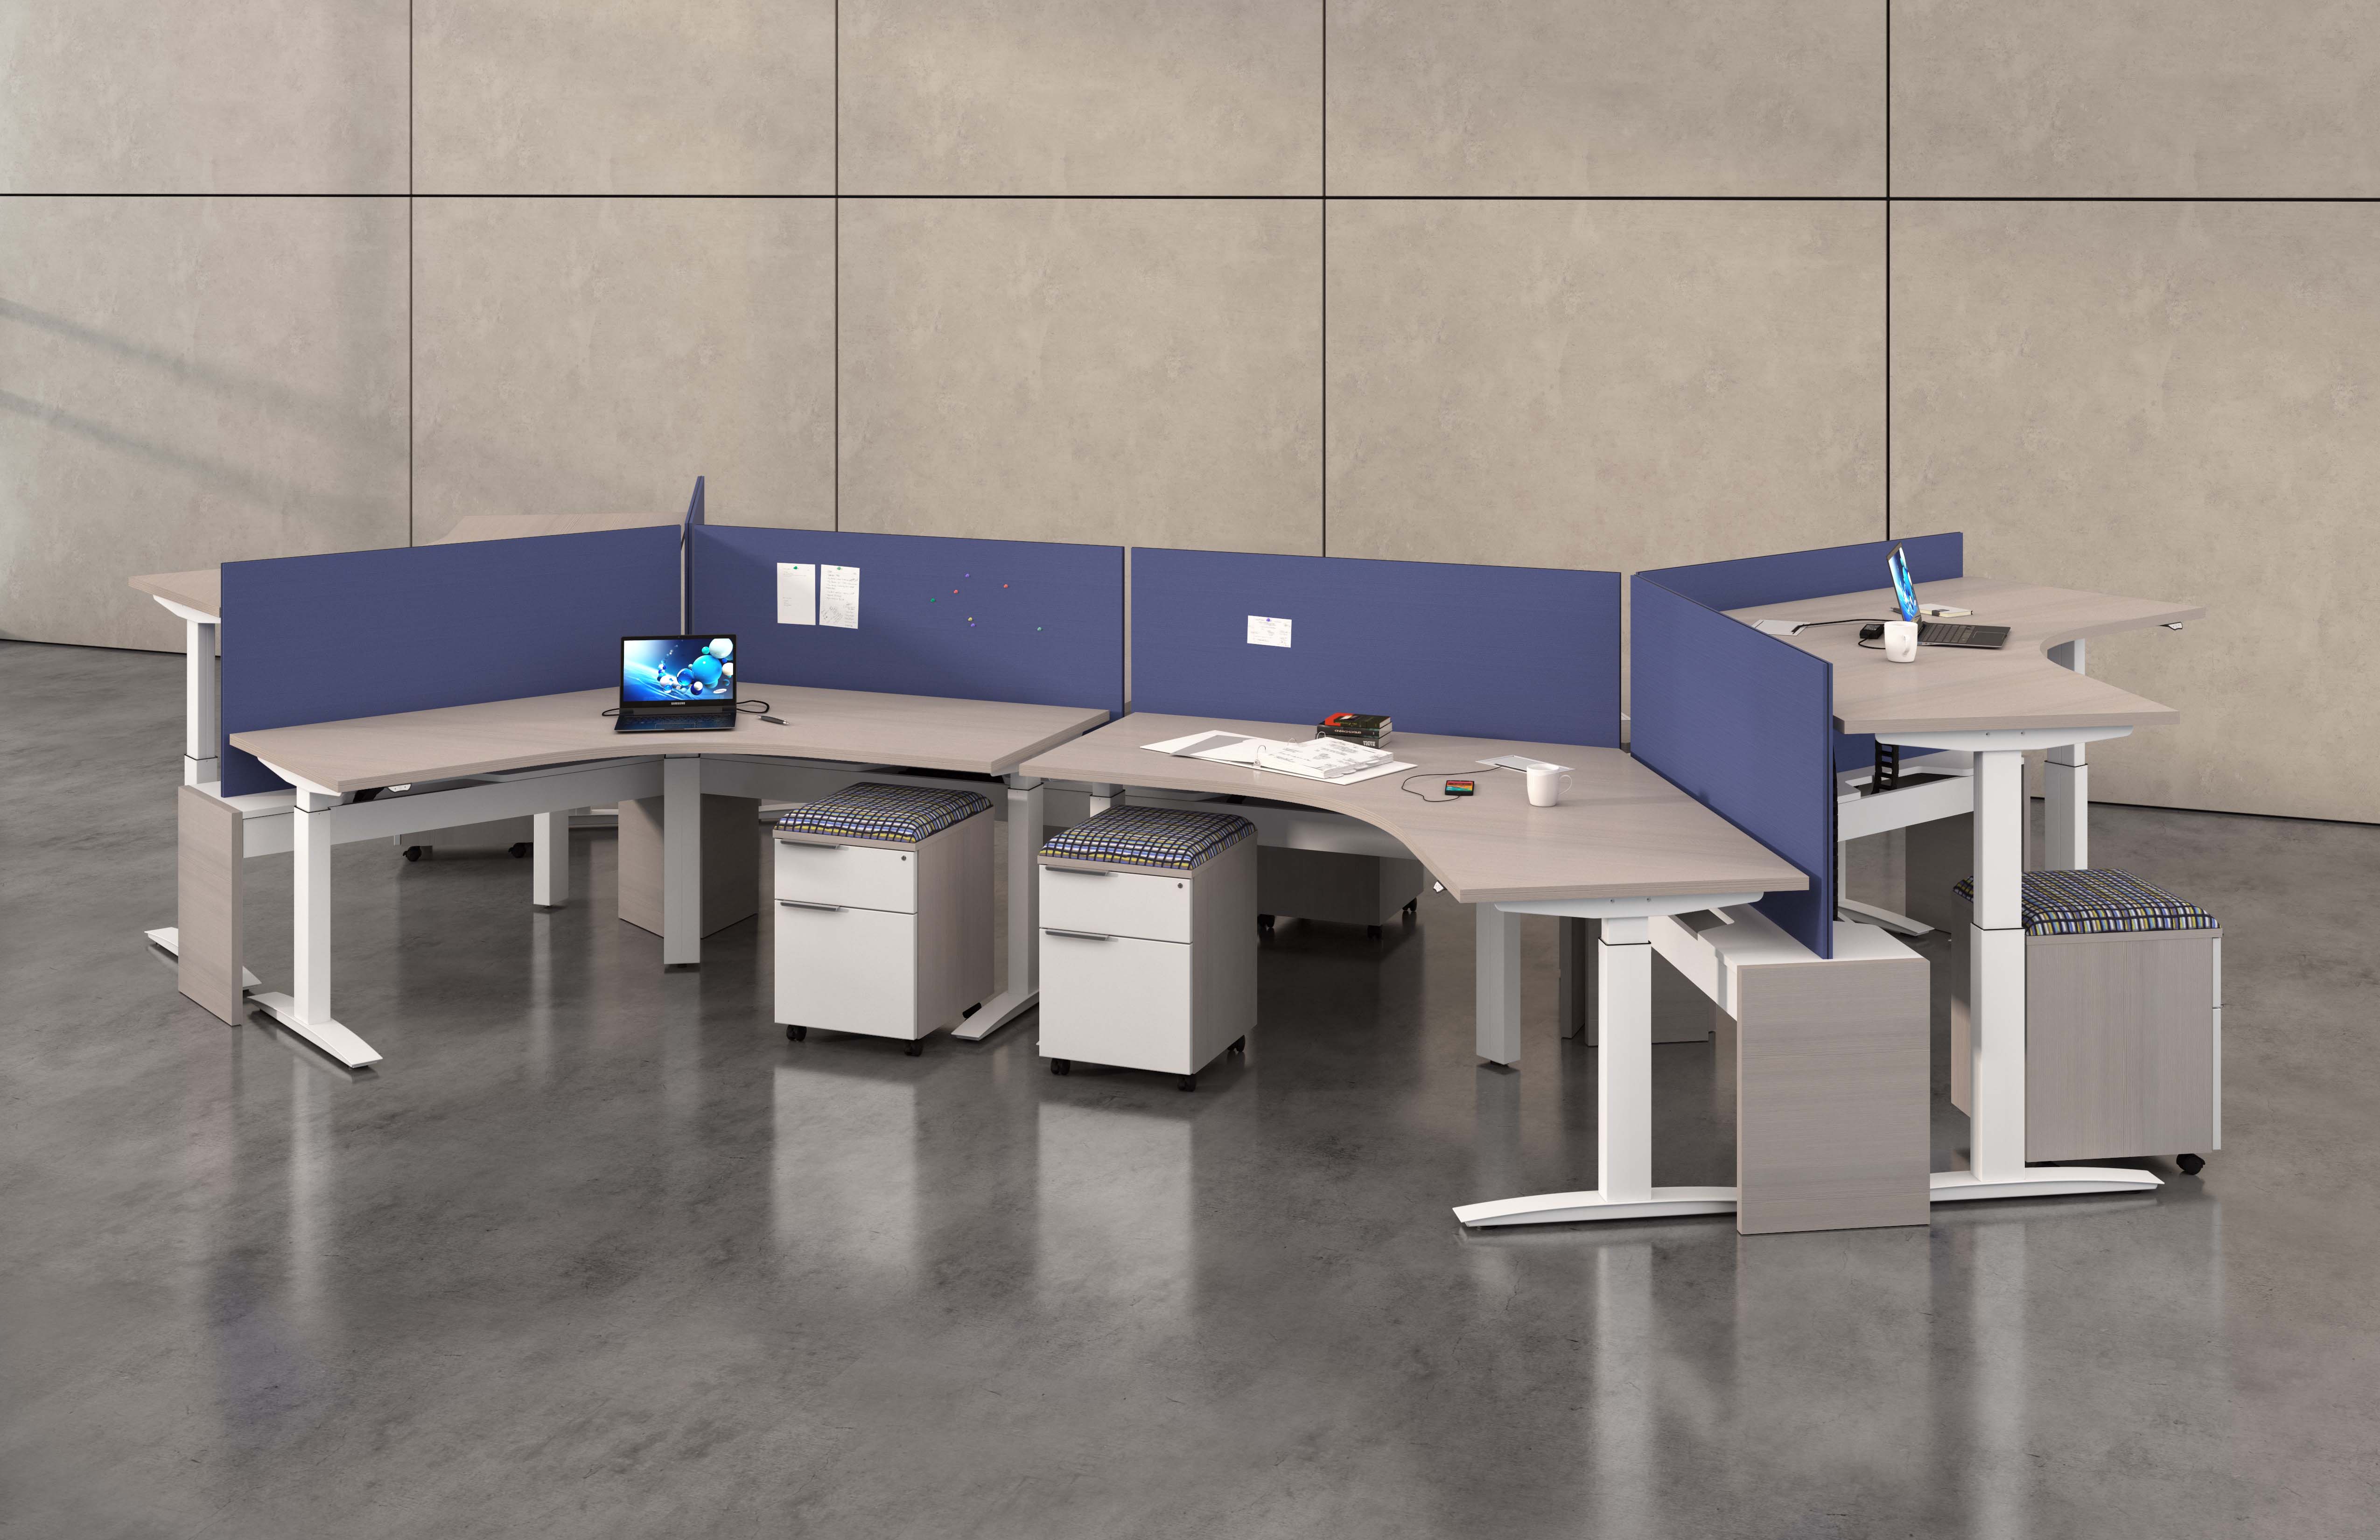 Hover adjustable-height worksurfaces can be integrated into all of DeskMakers casegoods lines, our TeamWorx desking line, and stand-alone workstations. Hover benching also provides power distribution and cable management for adjustable-height benching environments. Image courtesy of DeskMakers.